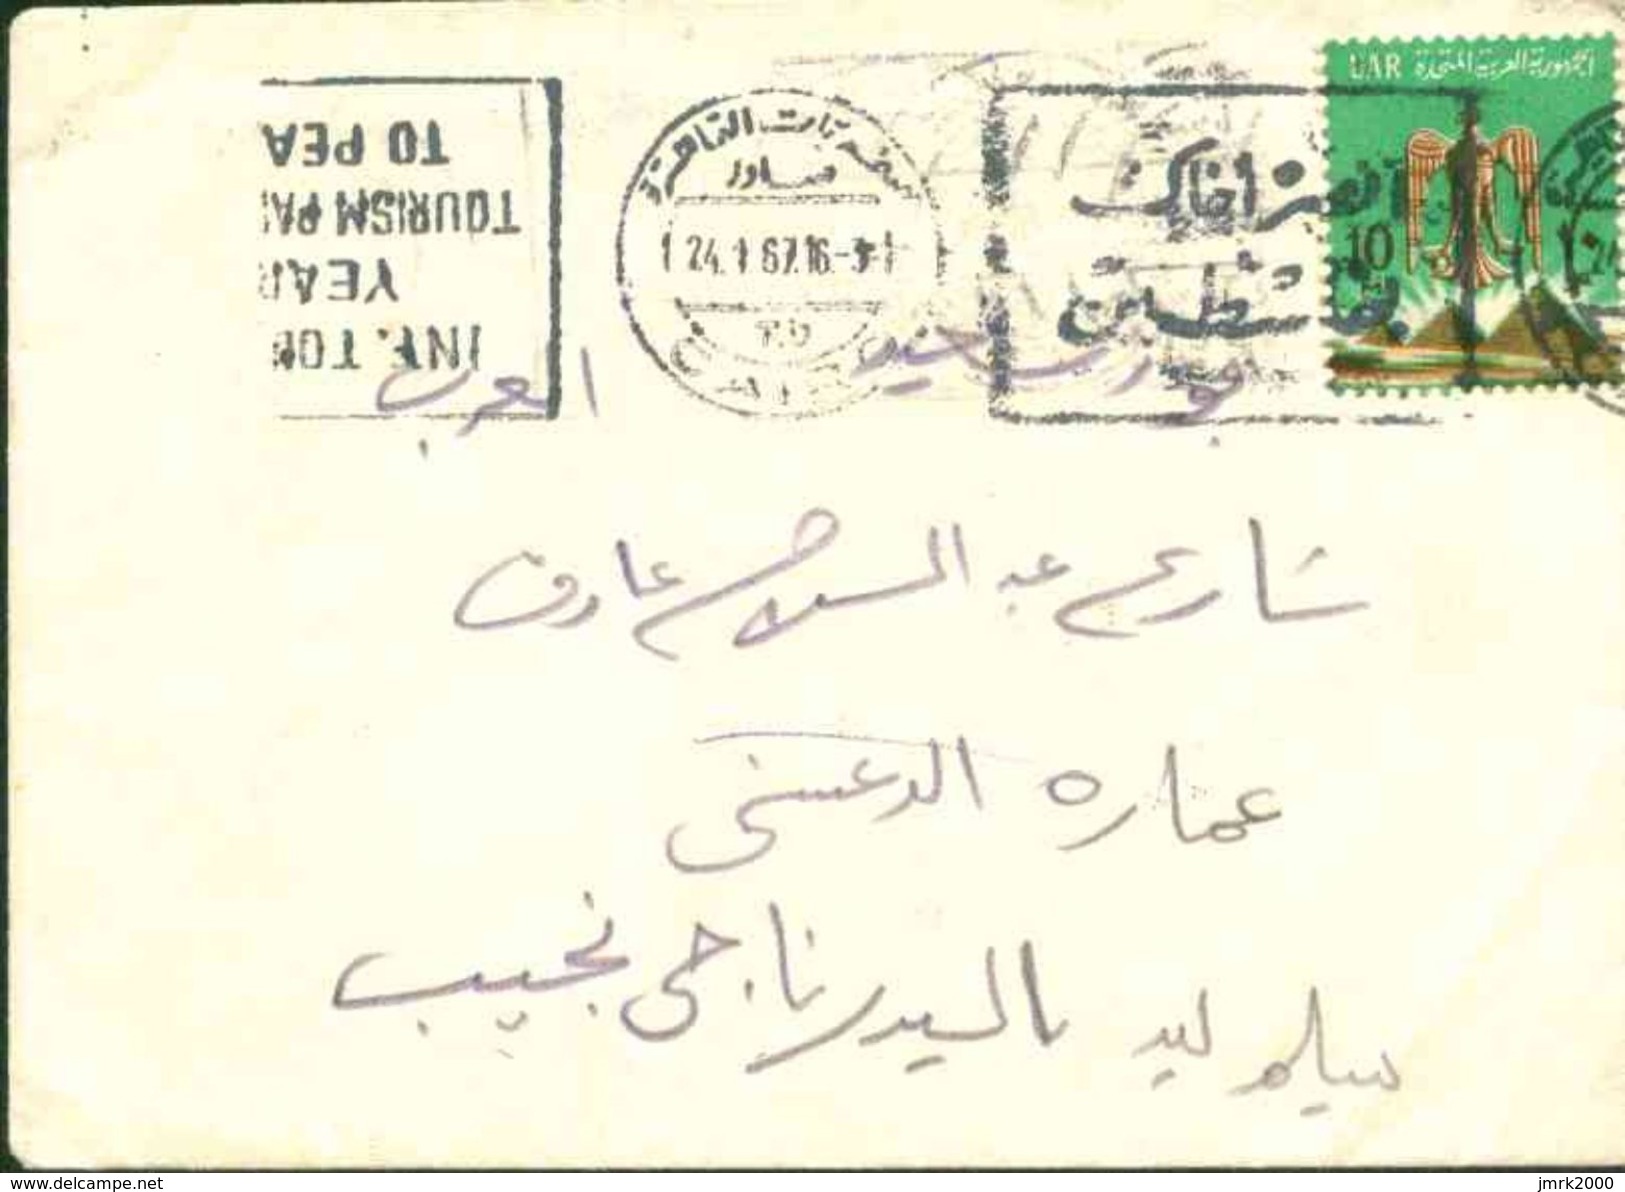 Egypt 1967 Used Cover - Postmark Port Said - Cairo - Covers & Documents